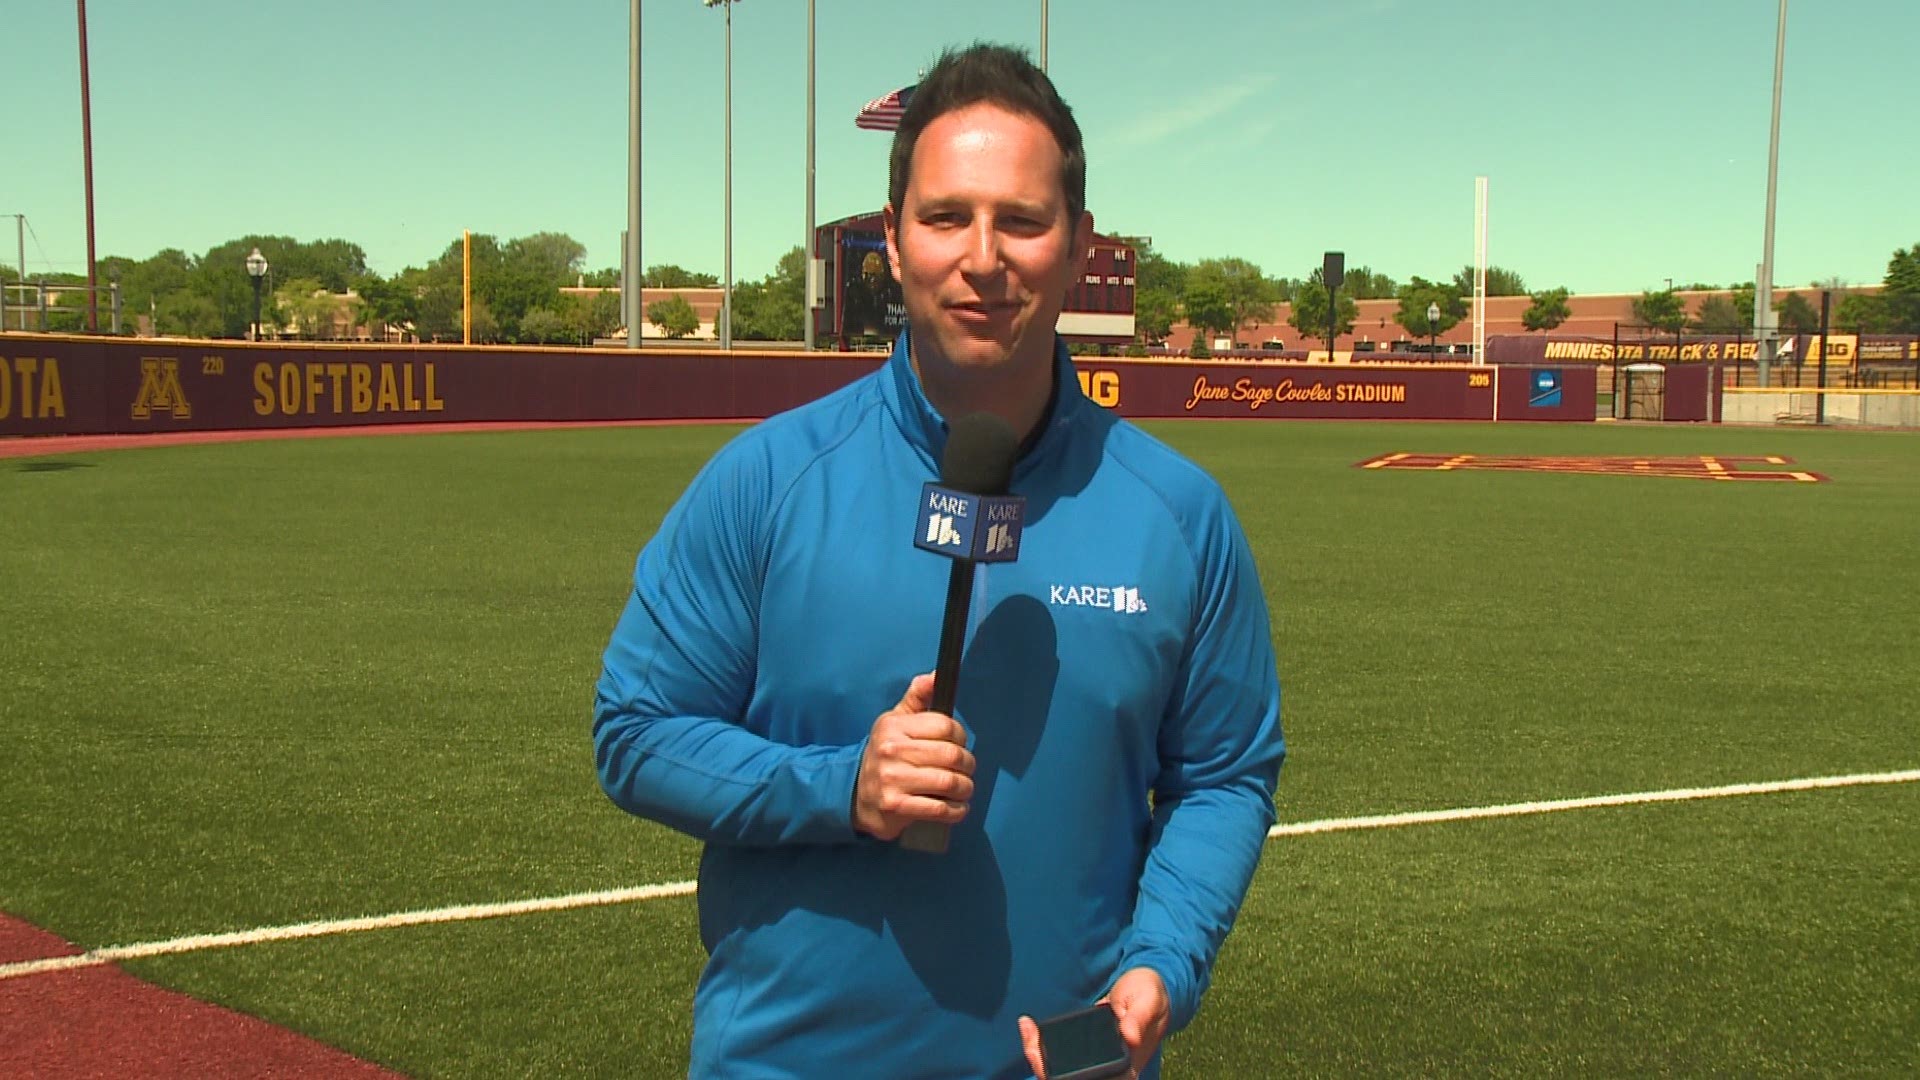 The victory puts Minnesota into the Super Regionals for just the second time in school history. They'll host the Super Regional as well next weekend for the first time ever in school history. https://kare11.tv/2JTmpO2